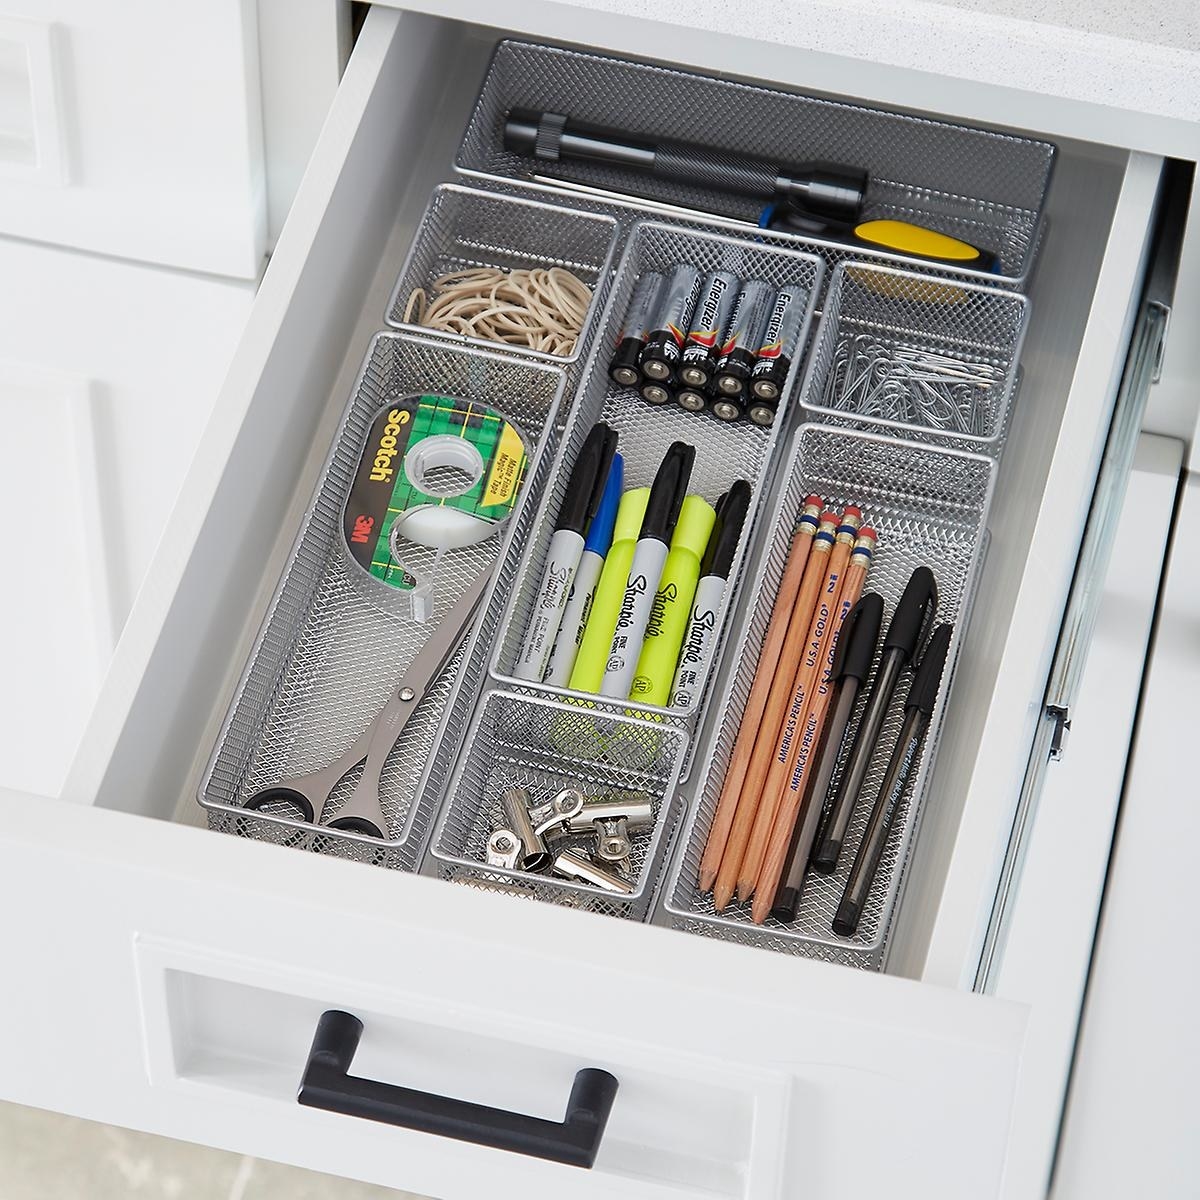 The drawer organizer with individual compartments full of pens, pencils, and other office supplies